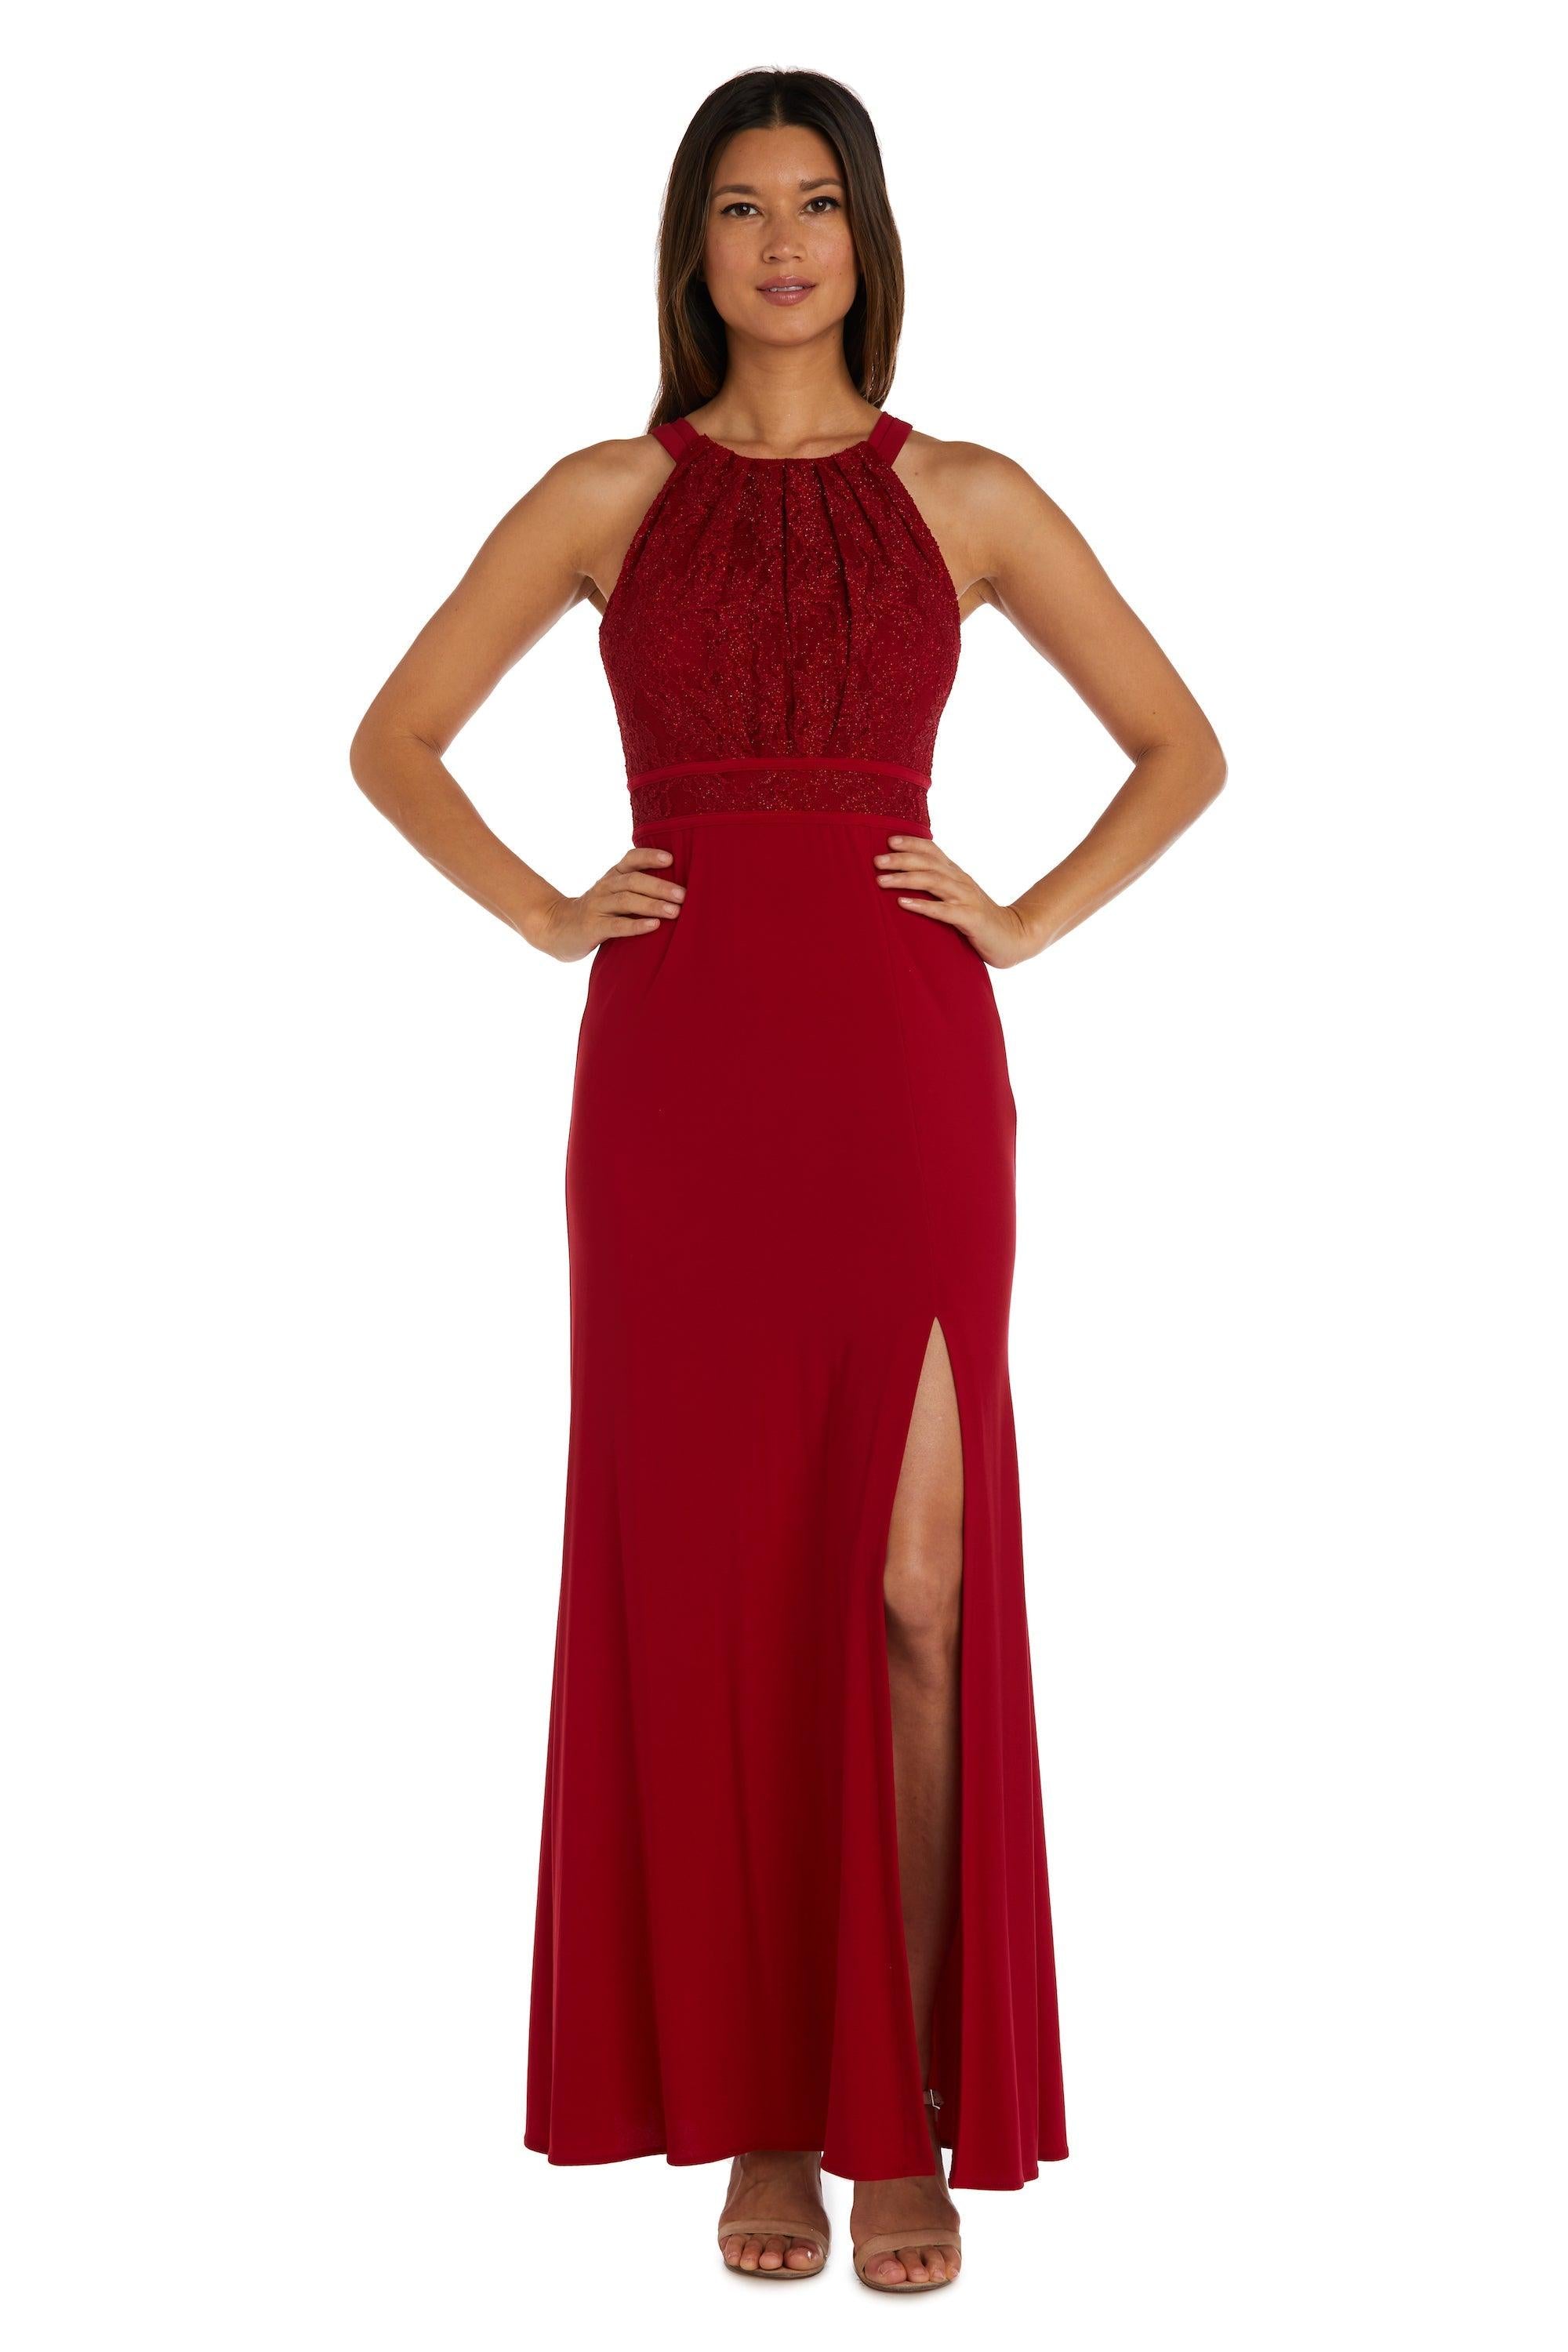 Nightway Long Halter Pleated Lace Formal Gown 21799 - The Dress Outlet